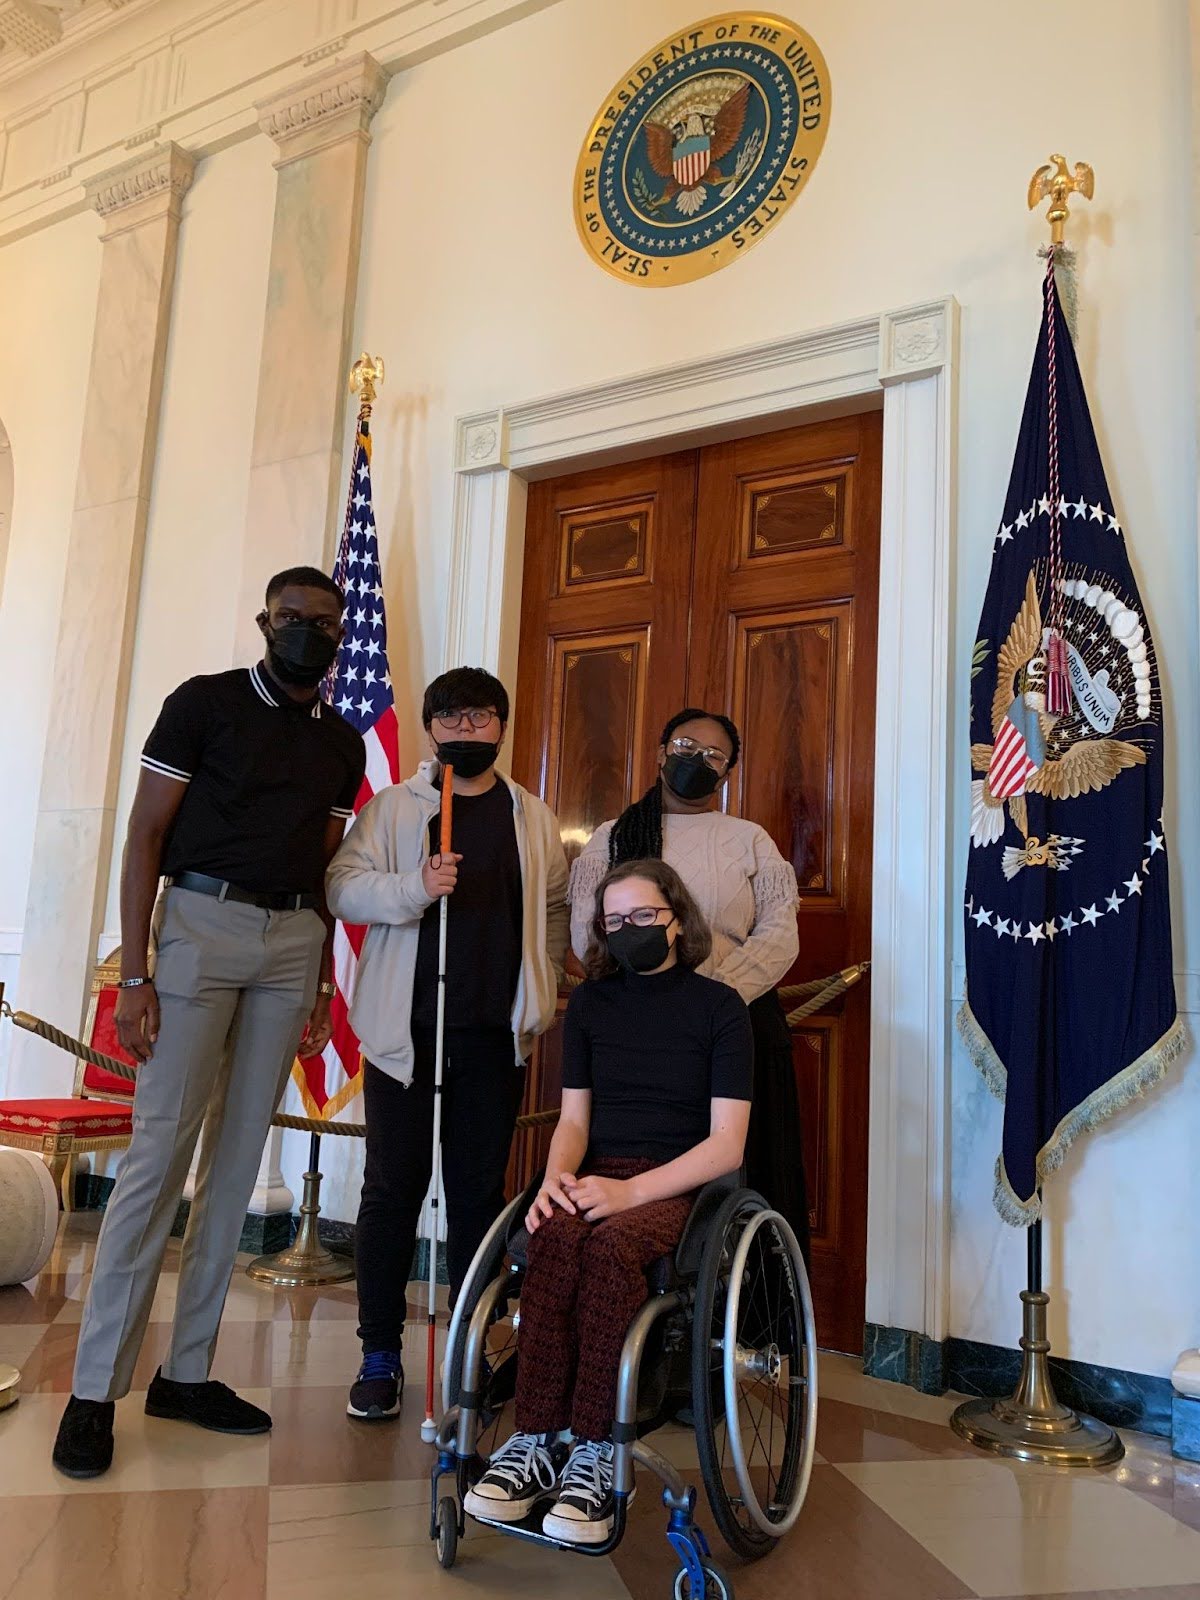 Four people stand in front of the Seal of the President of the United States, between two American flags. One individual is using a white cane, and another is seated in a wheelchair, all are wearing masks.